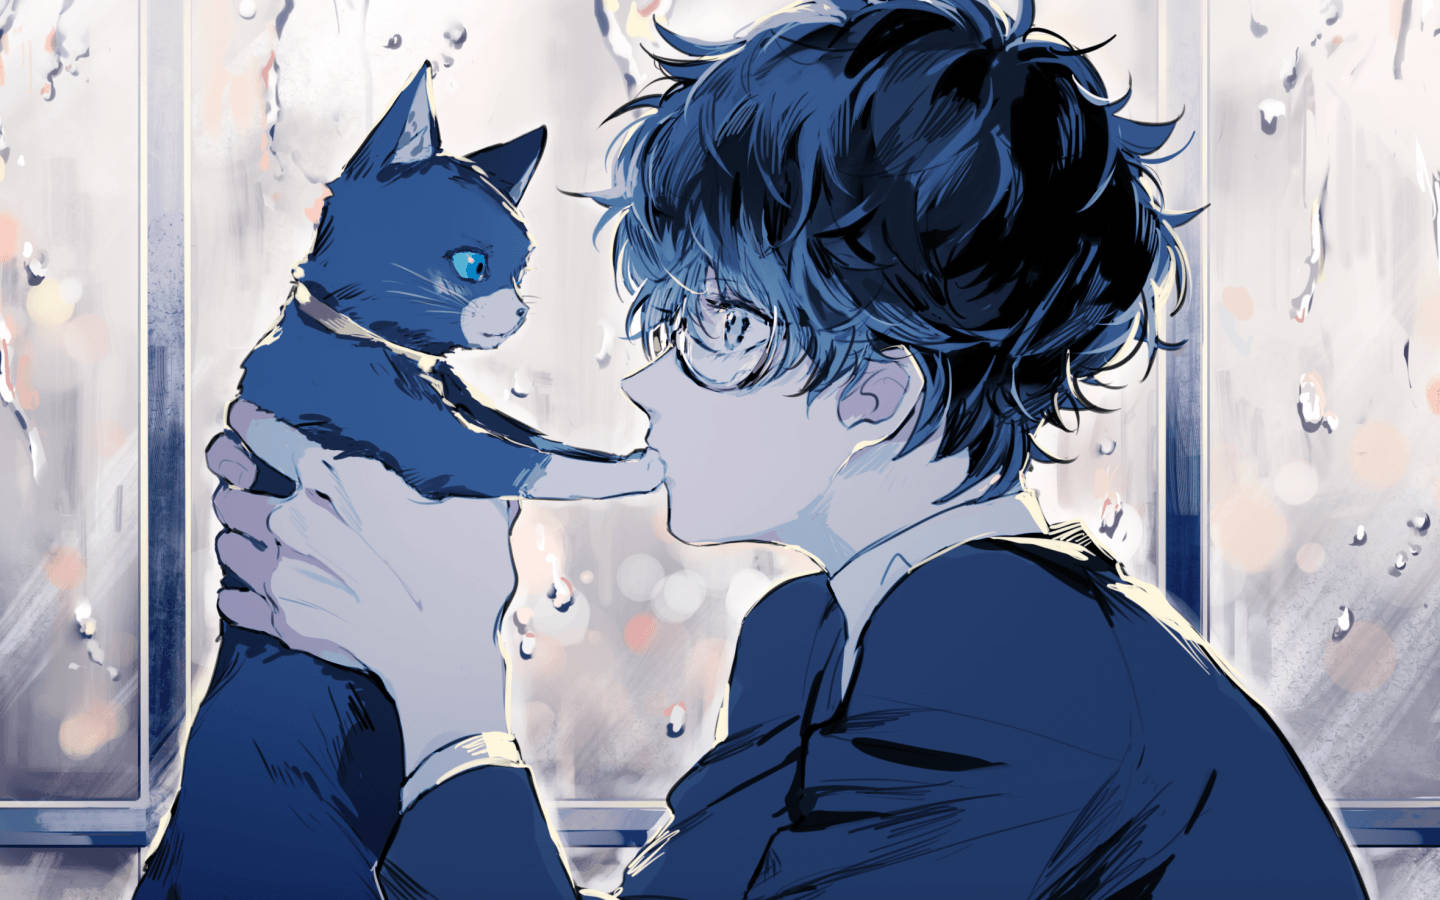 Cute Anime Guy And Blue Cat Wallpaper